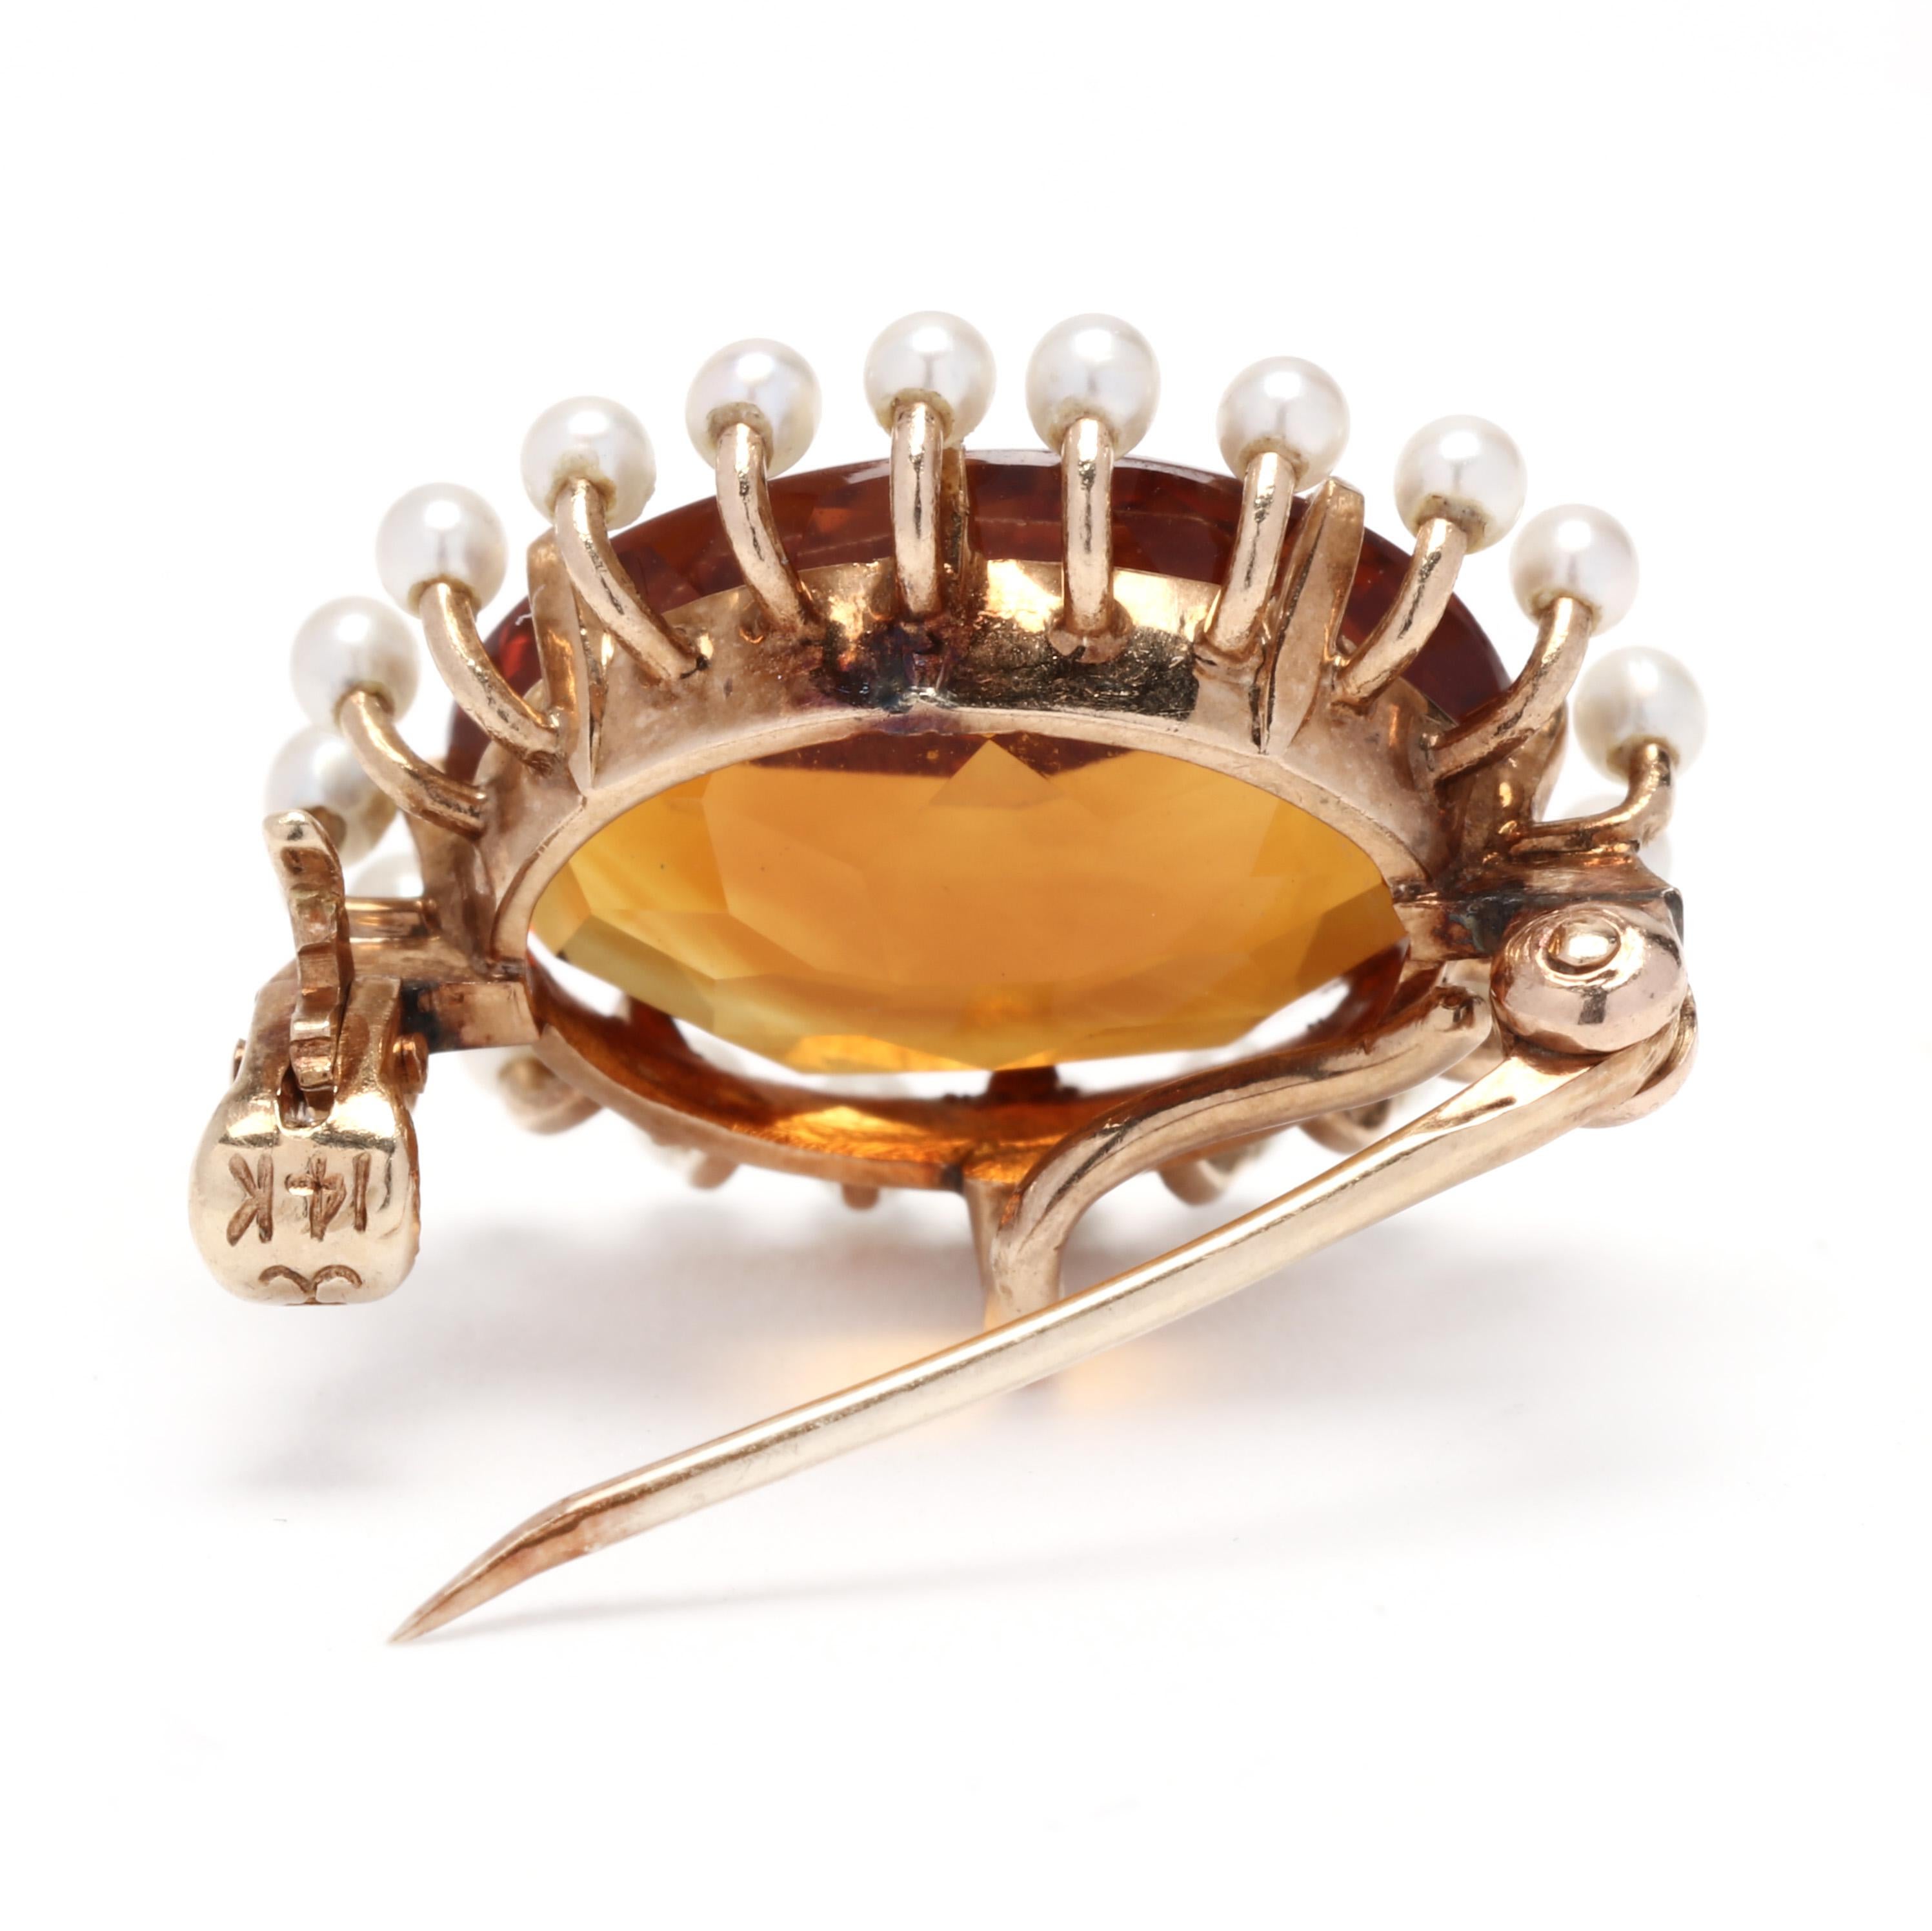 Oval Cut 5ct Antique Krementz Madeira Citrine Seed Pearl Oval Brooch, 14K Yellow Gold